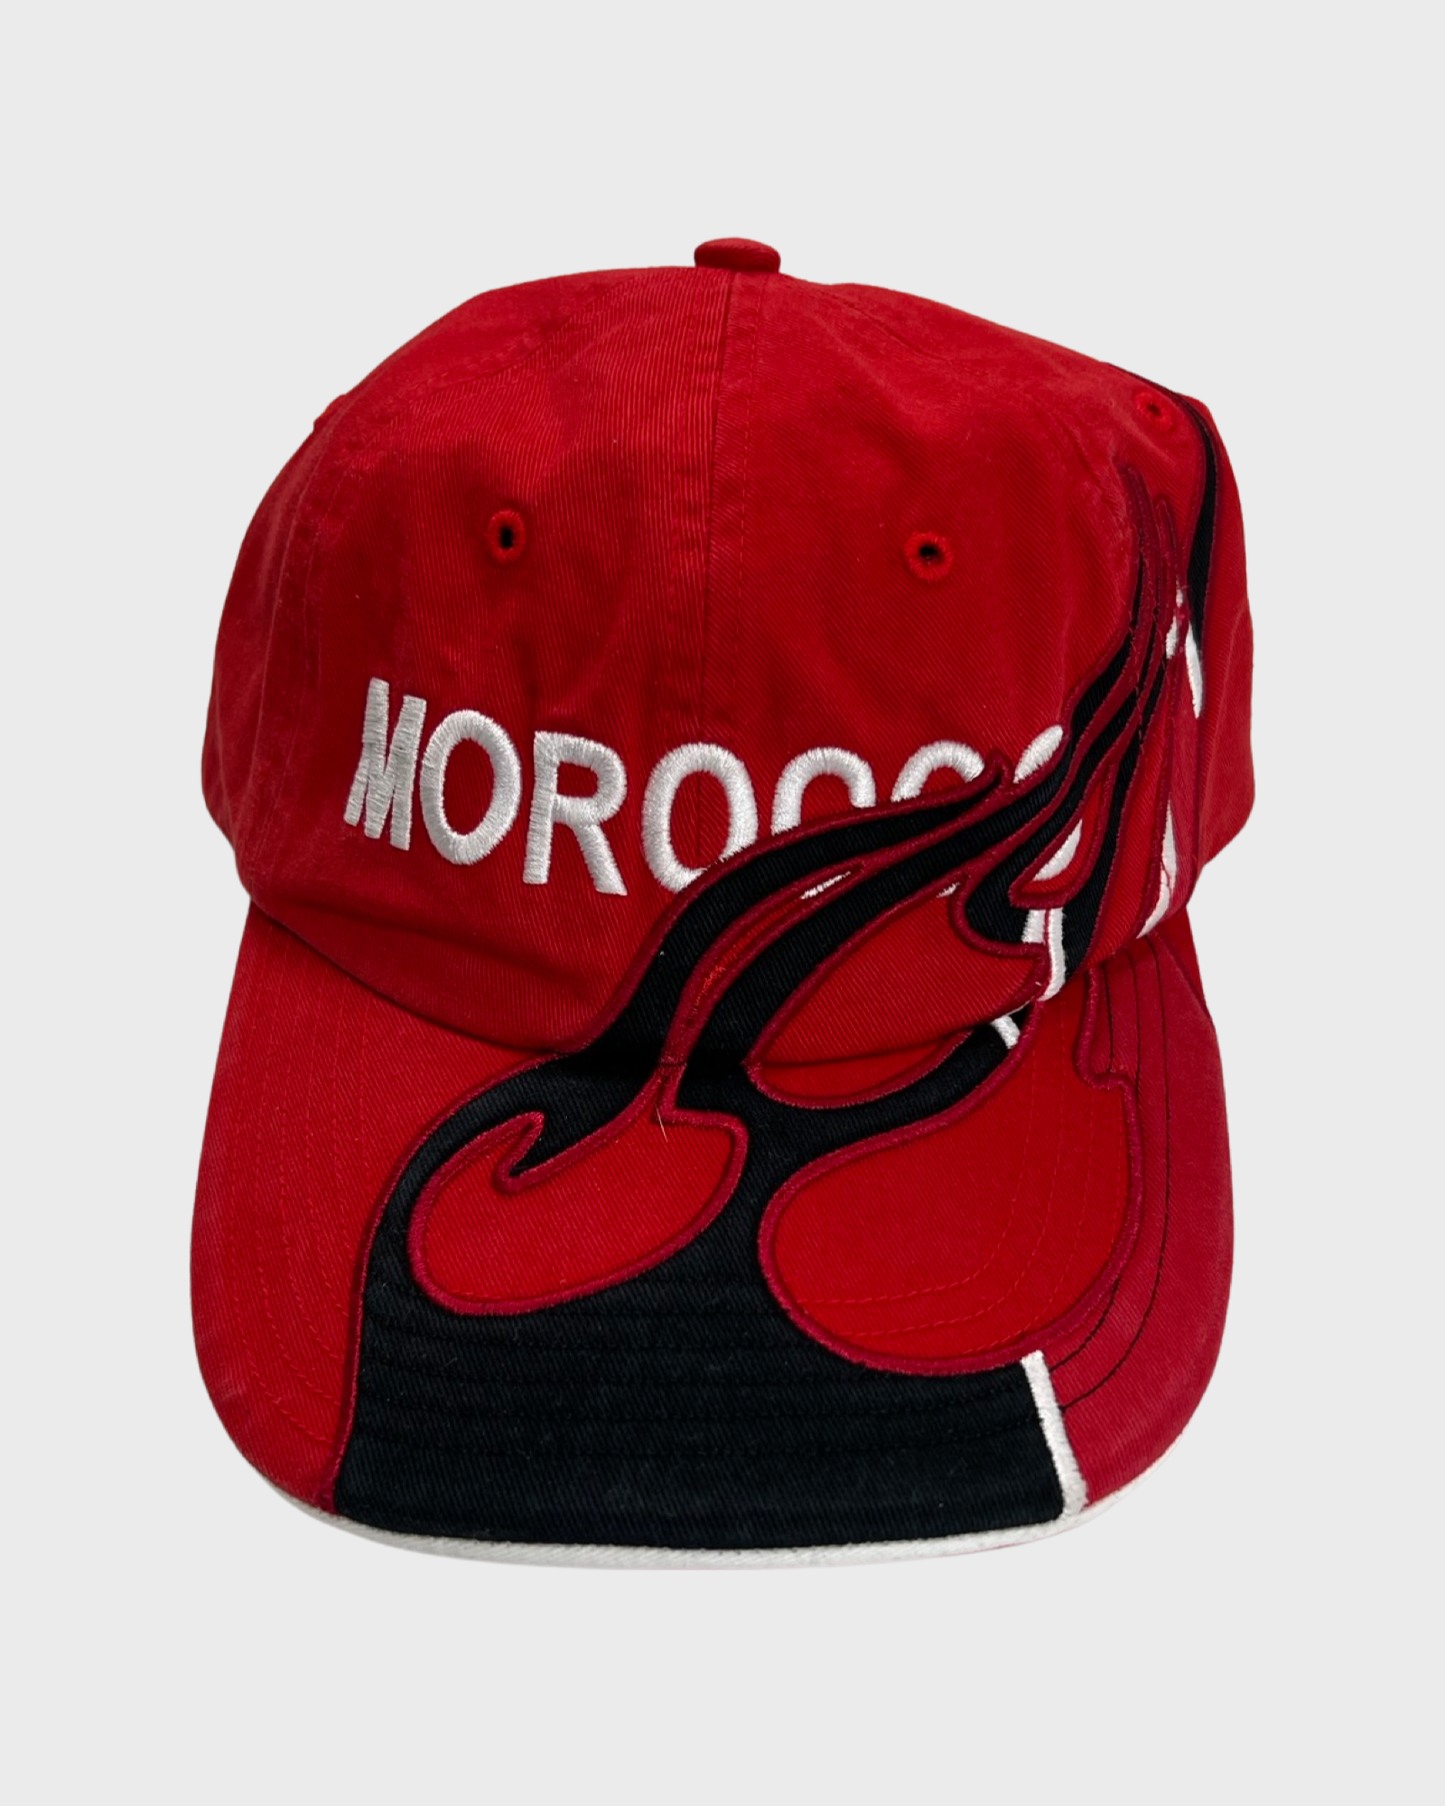 Vetements x Rebook AW18 runway Morocco flame hat red SZ:OS